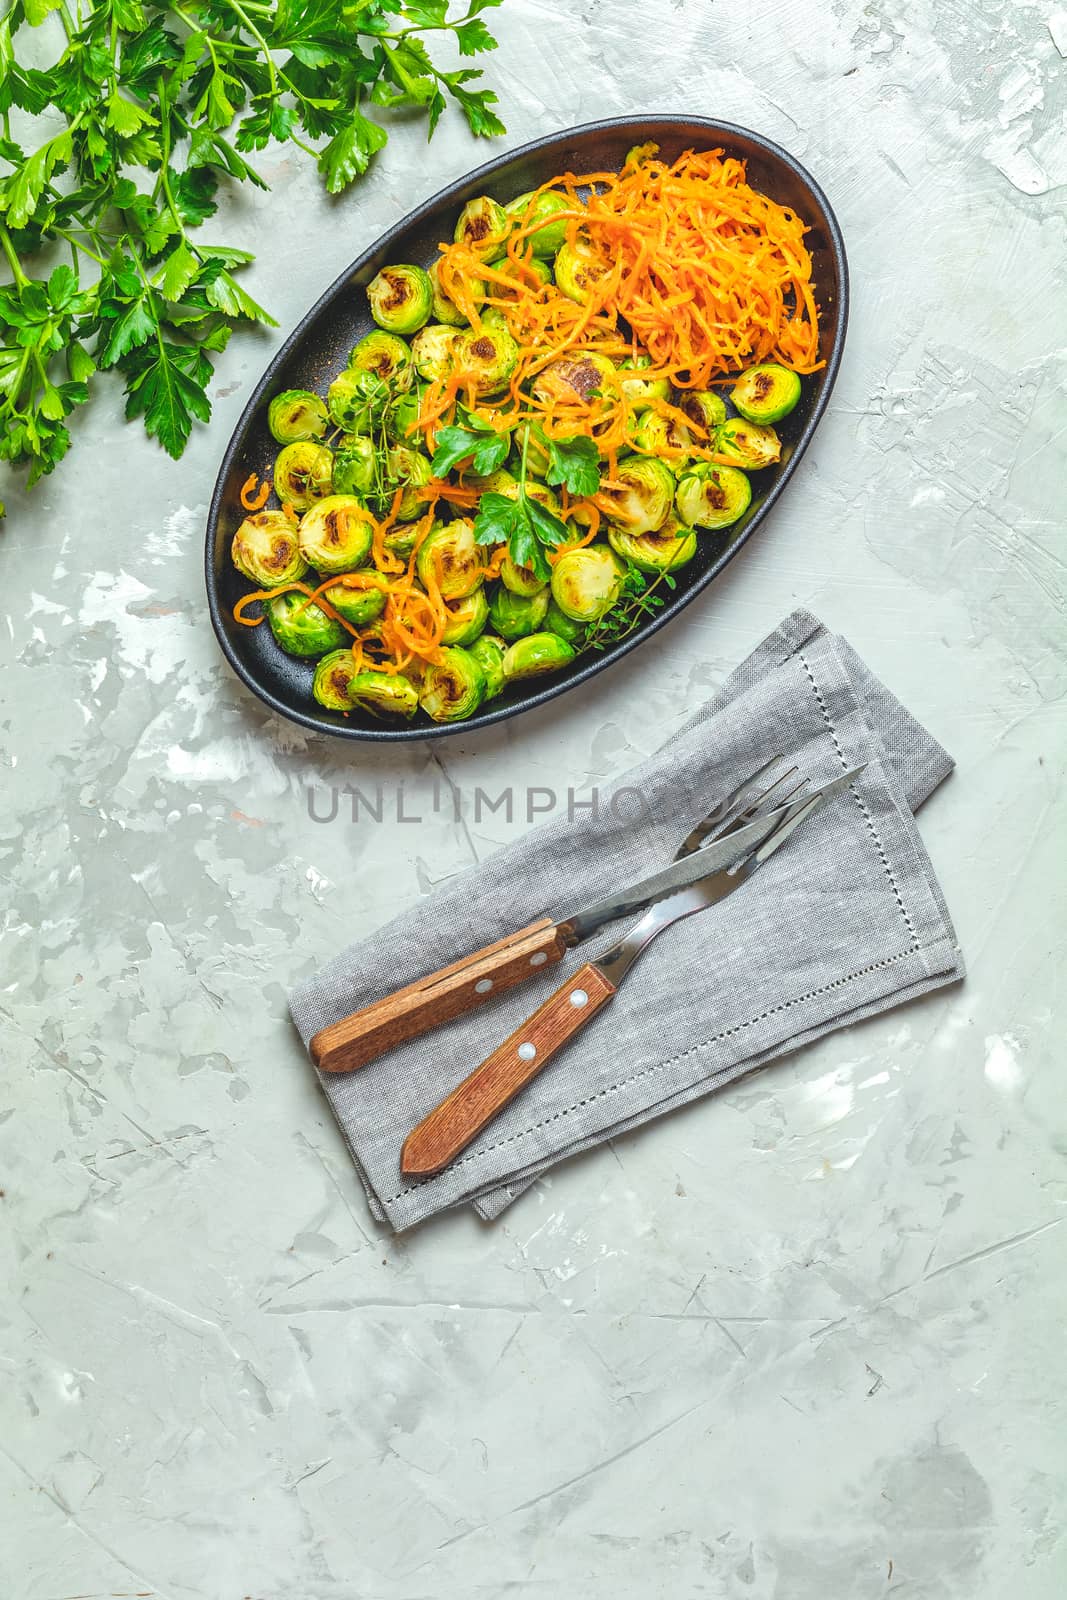 Delicious roasted Brussels sprouts and marinated carrot chips in served on black plate, light gray concrete table surface, top view, copy space for you text.